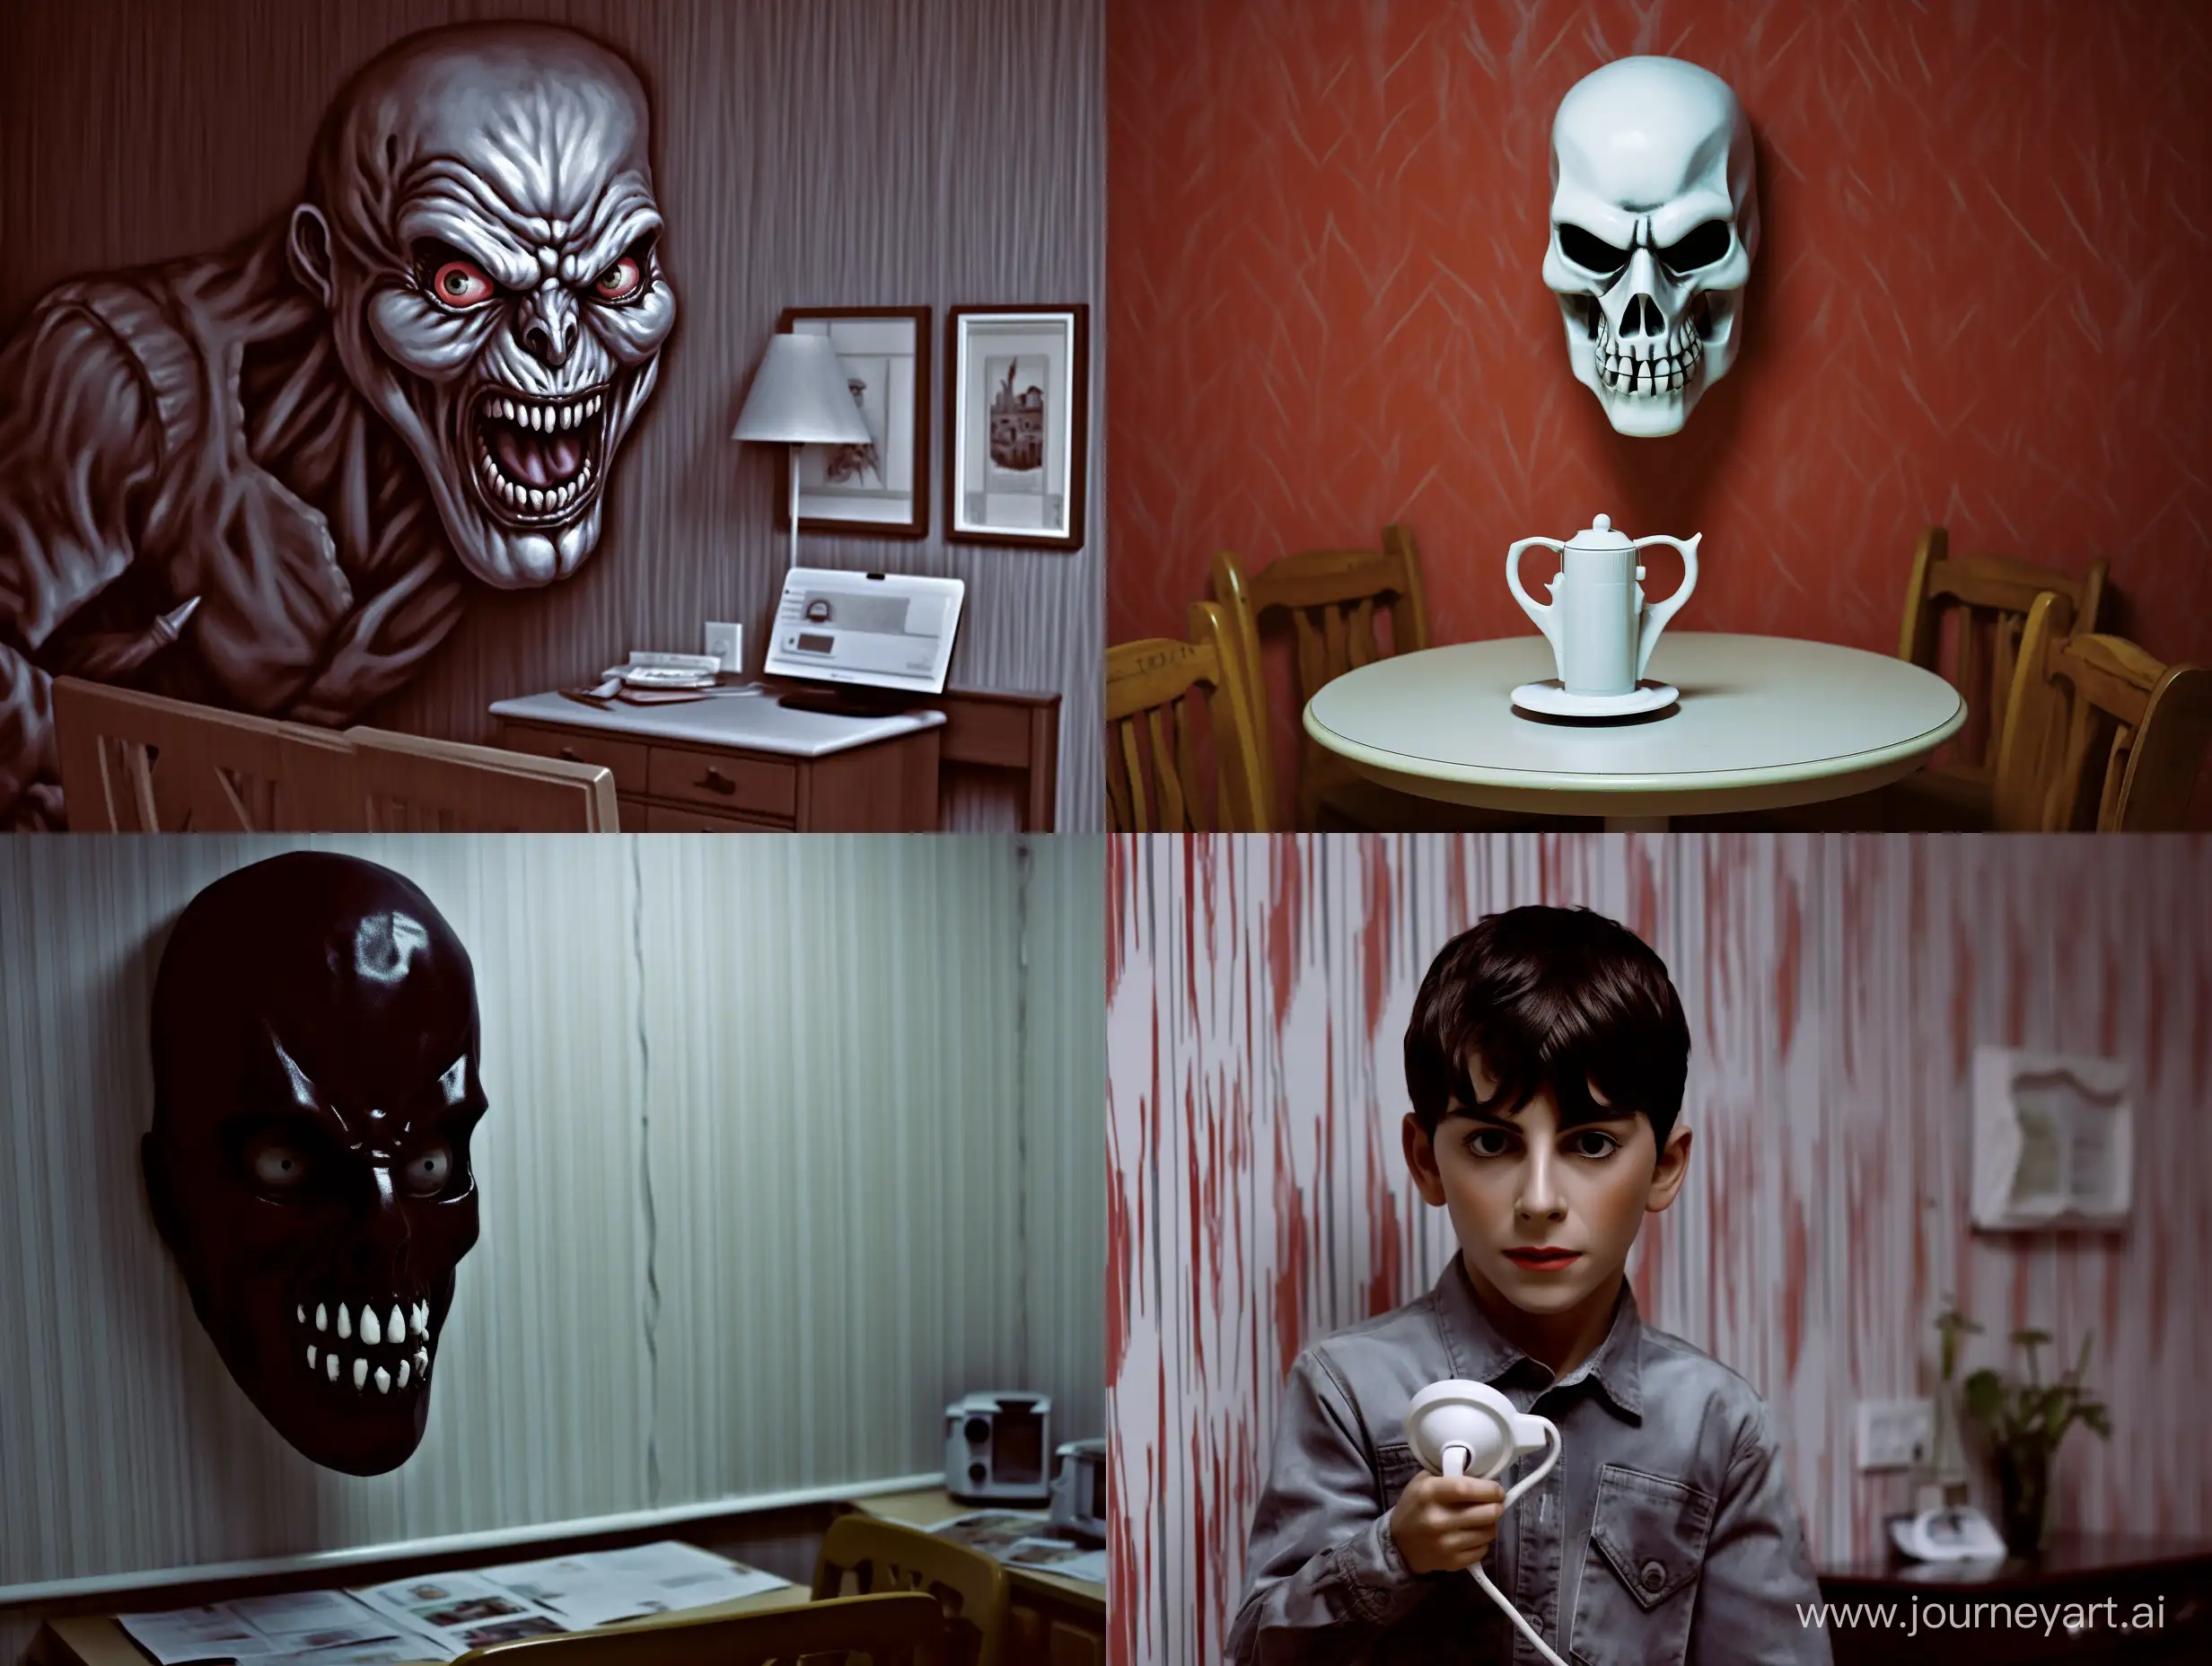 Drunken-Fathers-Nightmare-on-Elm-Street-Rampage-Captured-by-Son-in-Ordinary-Russian-Apartment